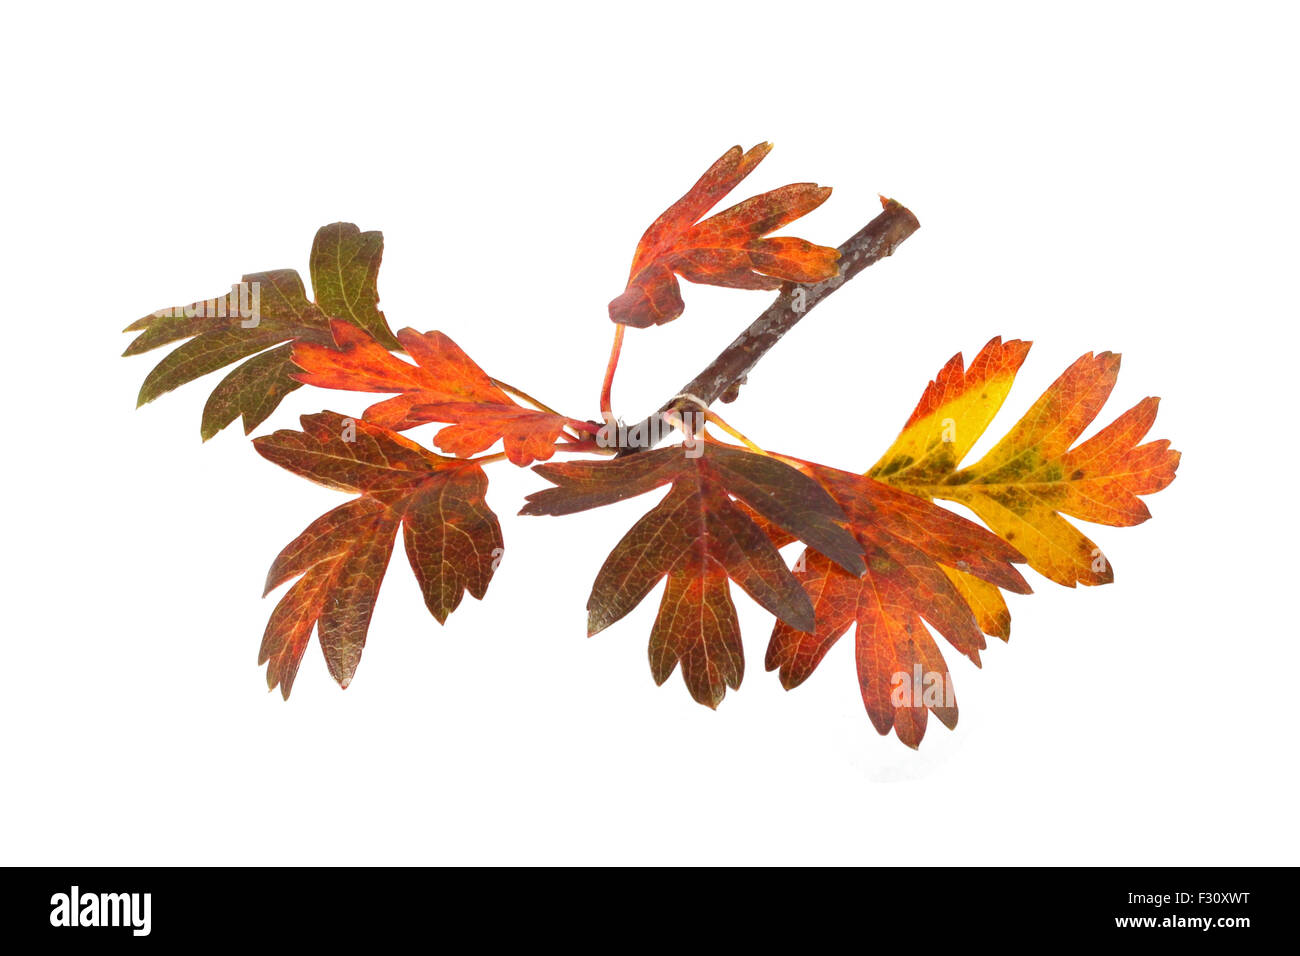 Close up photo of autumn leaves on a white background. Stock Photo